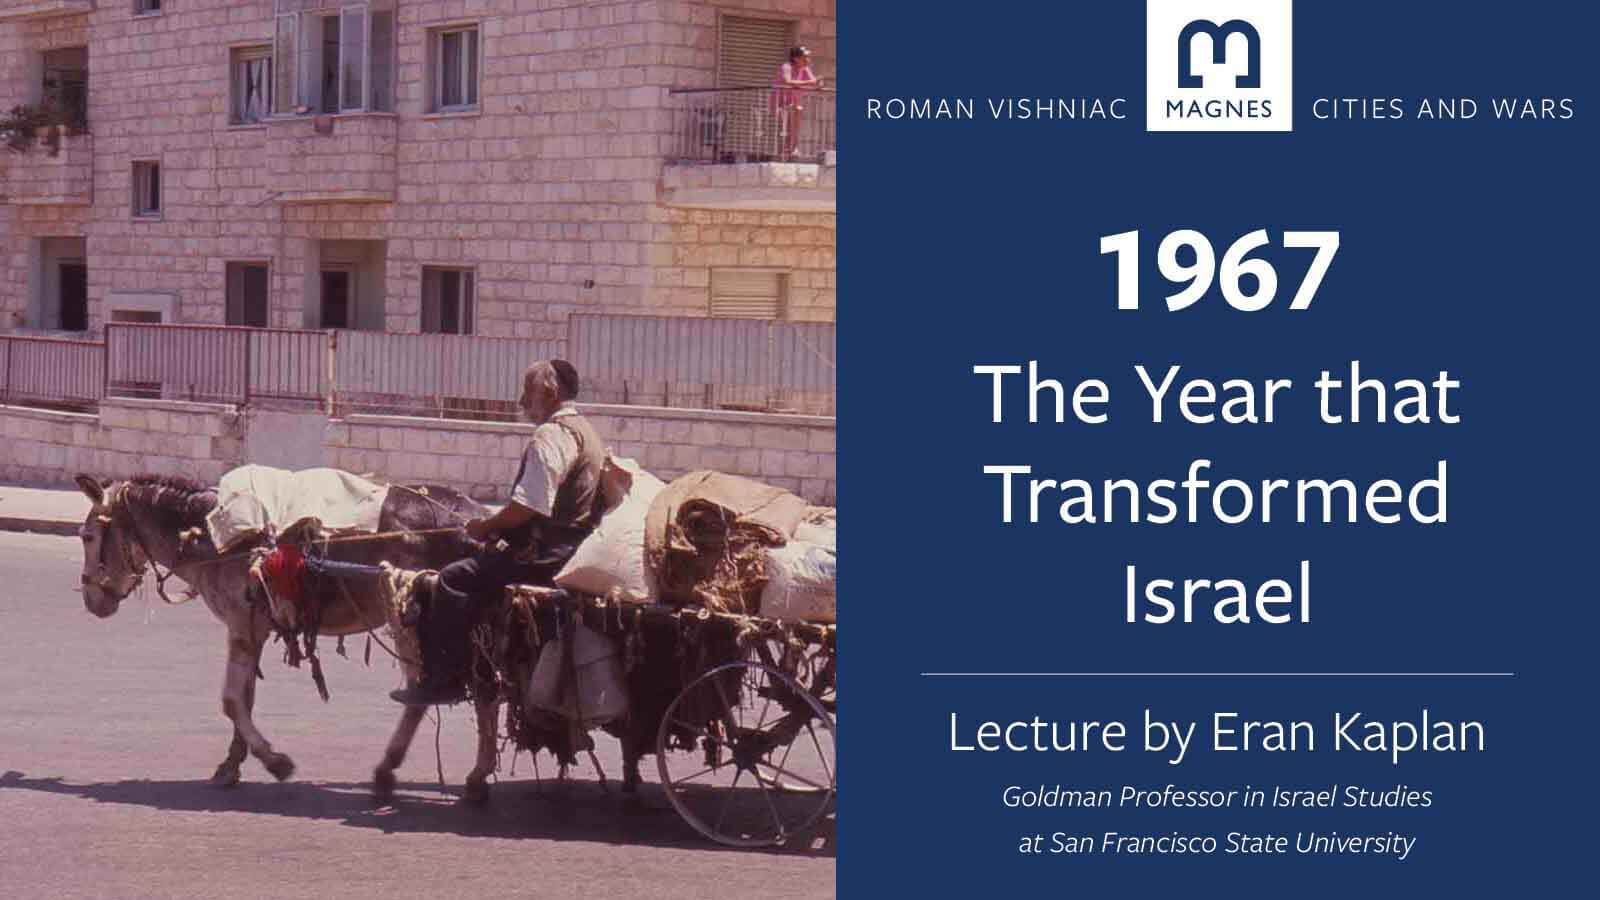 On left: color photo of a donkey pulling a cart on a street in Jerusalem. On right: a dark blue background with text Roman Vishniac, Magnes logo, Cities and Wars. 1967 The Year that Tranformed Israel. Lecture by Eran Kaplan Goldman Professor in Israel Studies at San Francisco State University